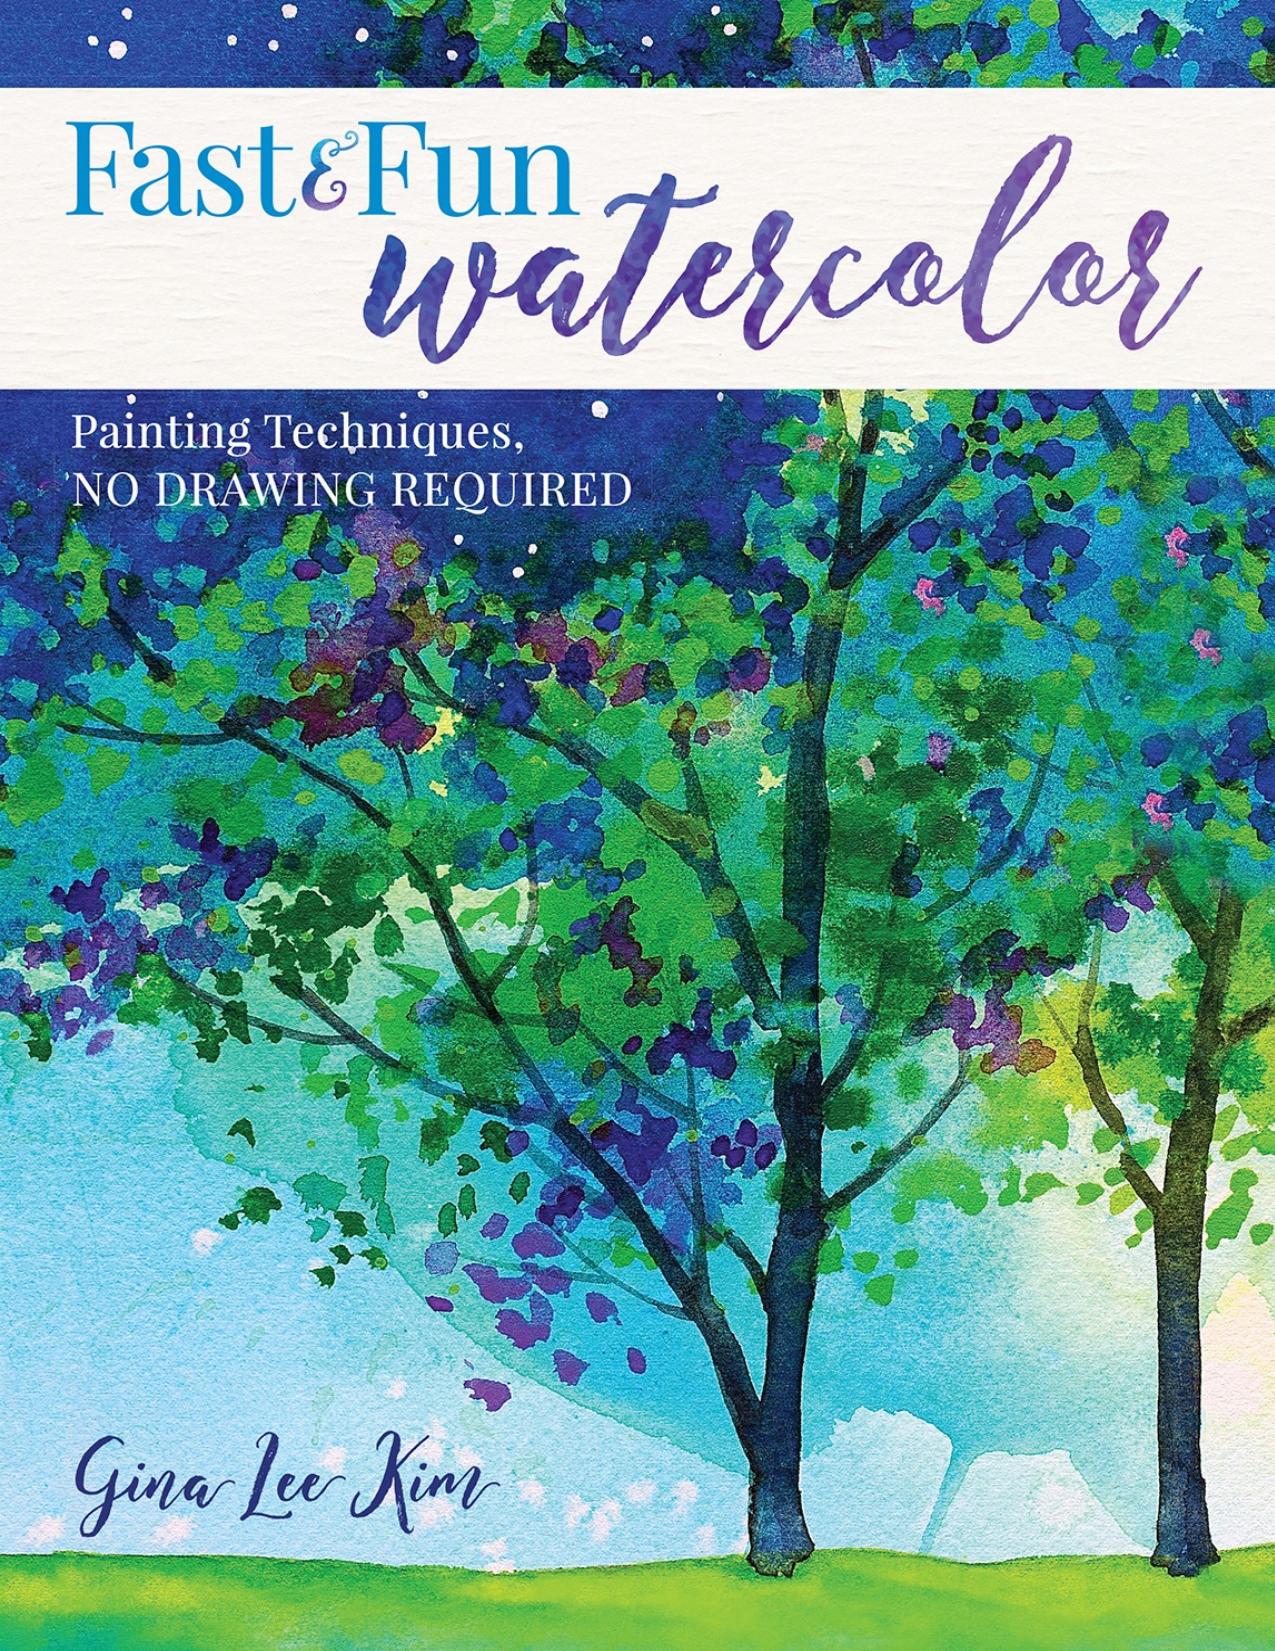 Fast and Fun Watercolor: Painting Techniques, No Drawing Required! - PDFDrive.com